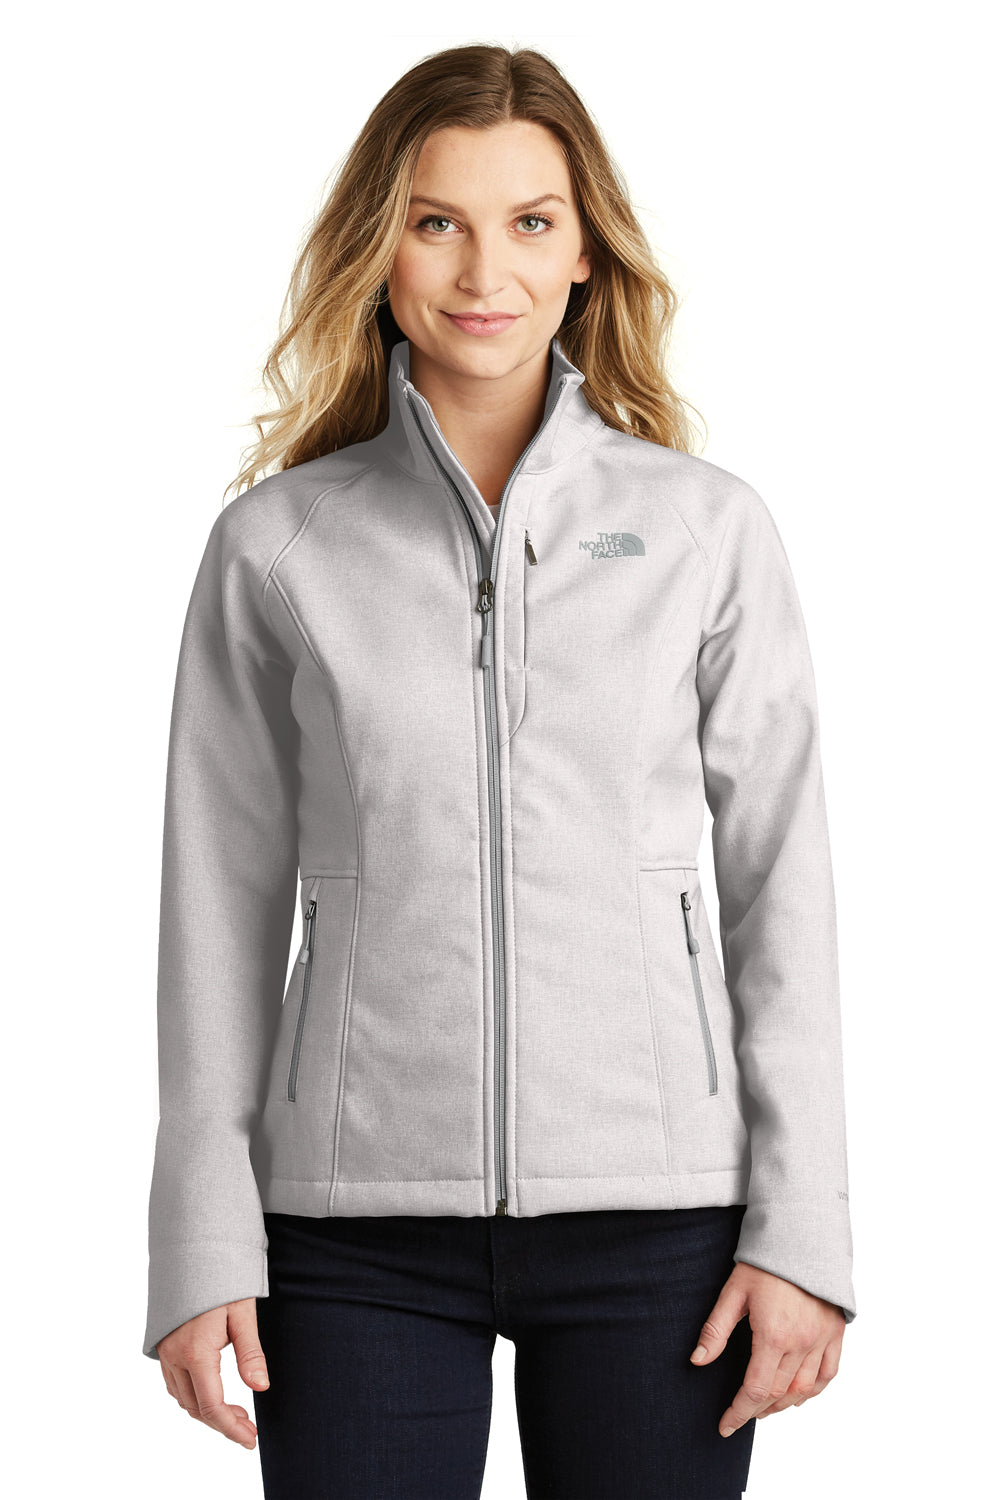 The North Face Womens Apex Barrier Wind & Resistant Full Zip Jacket -  Heather Light Grey